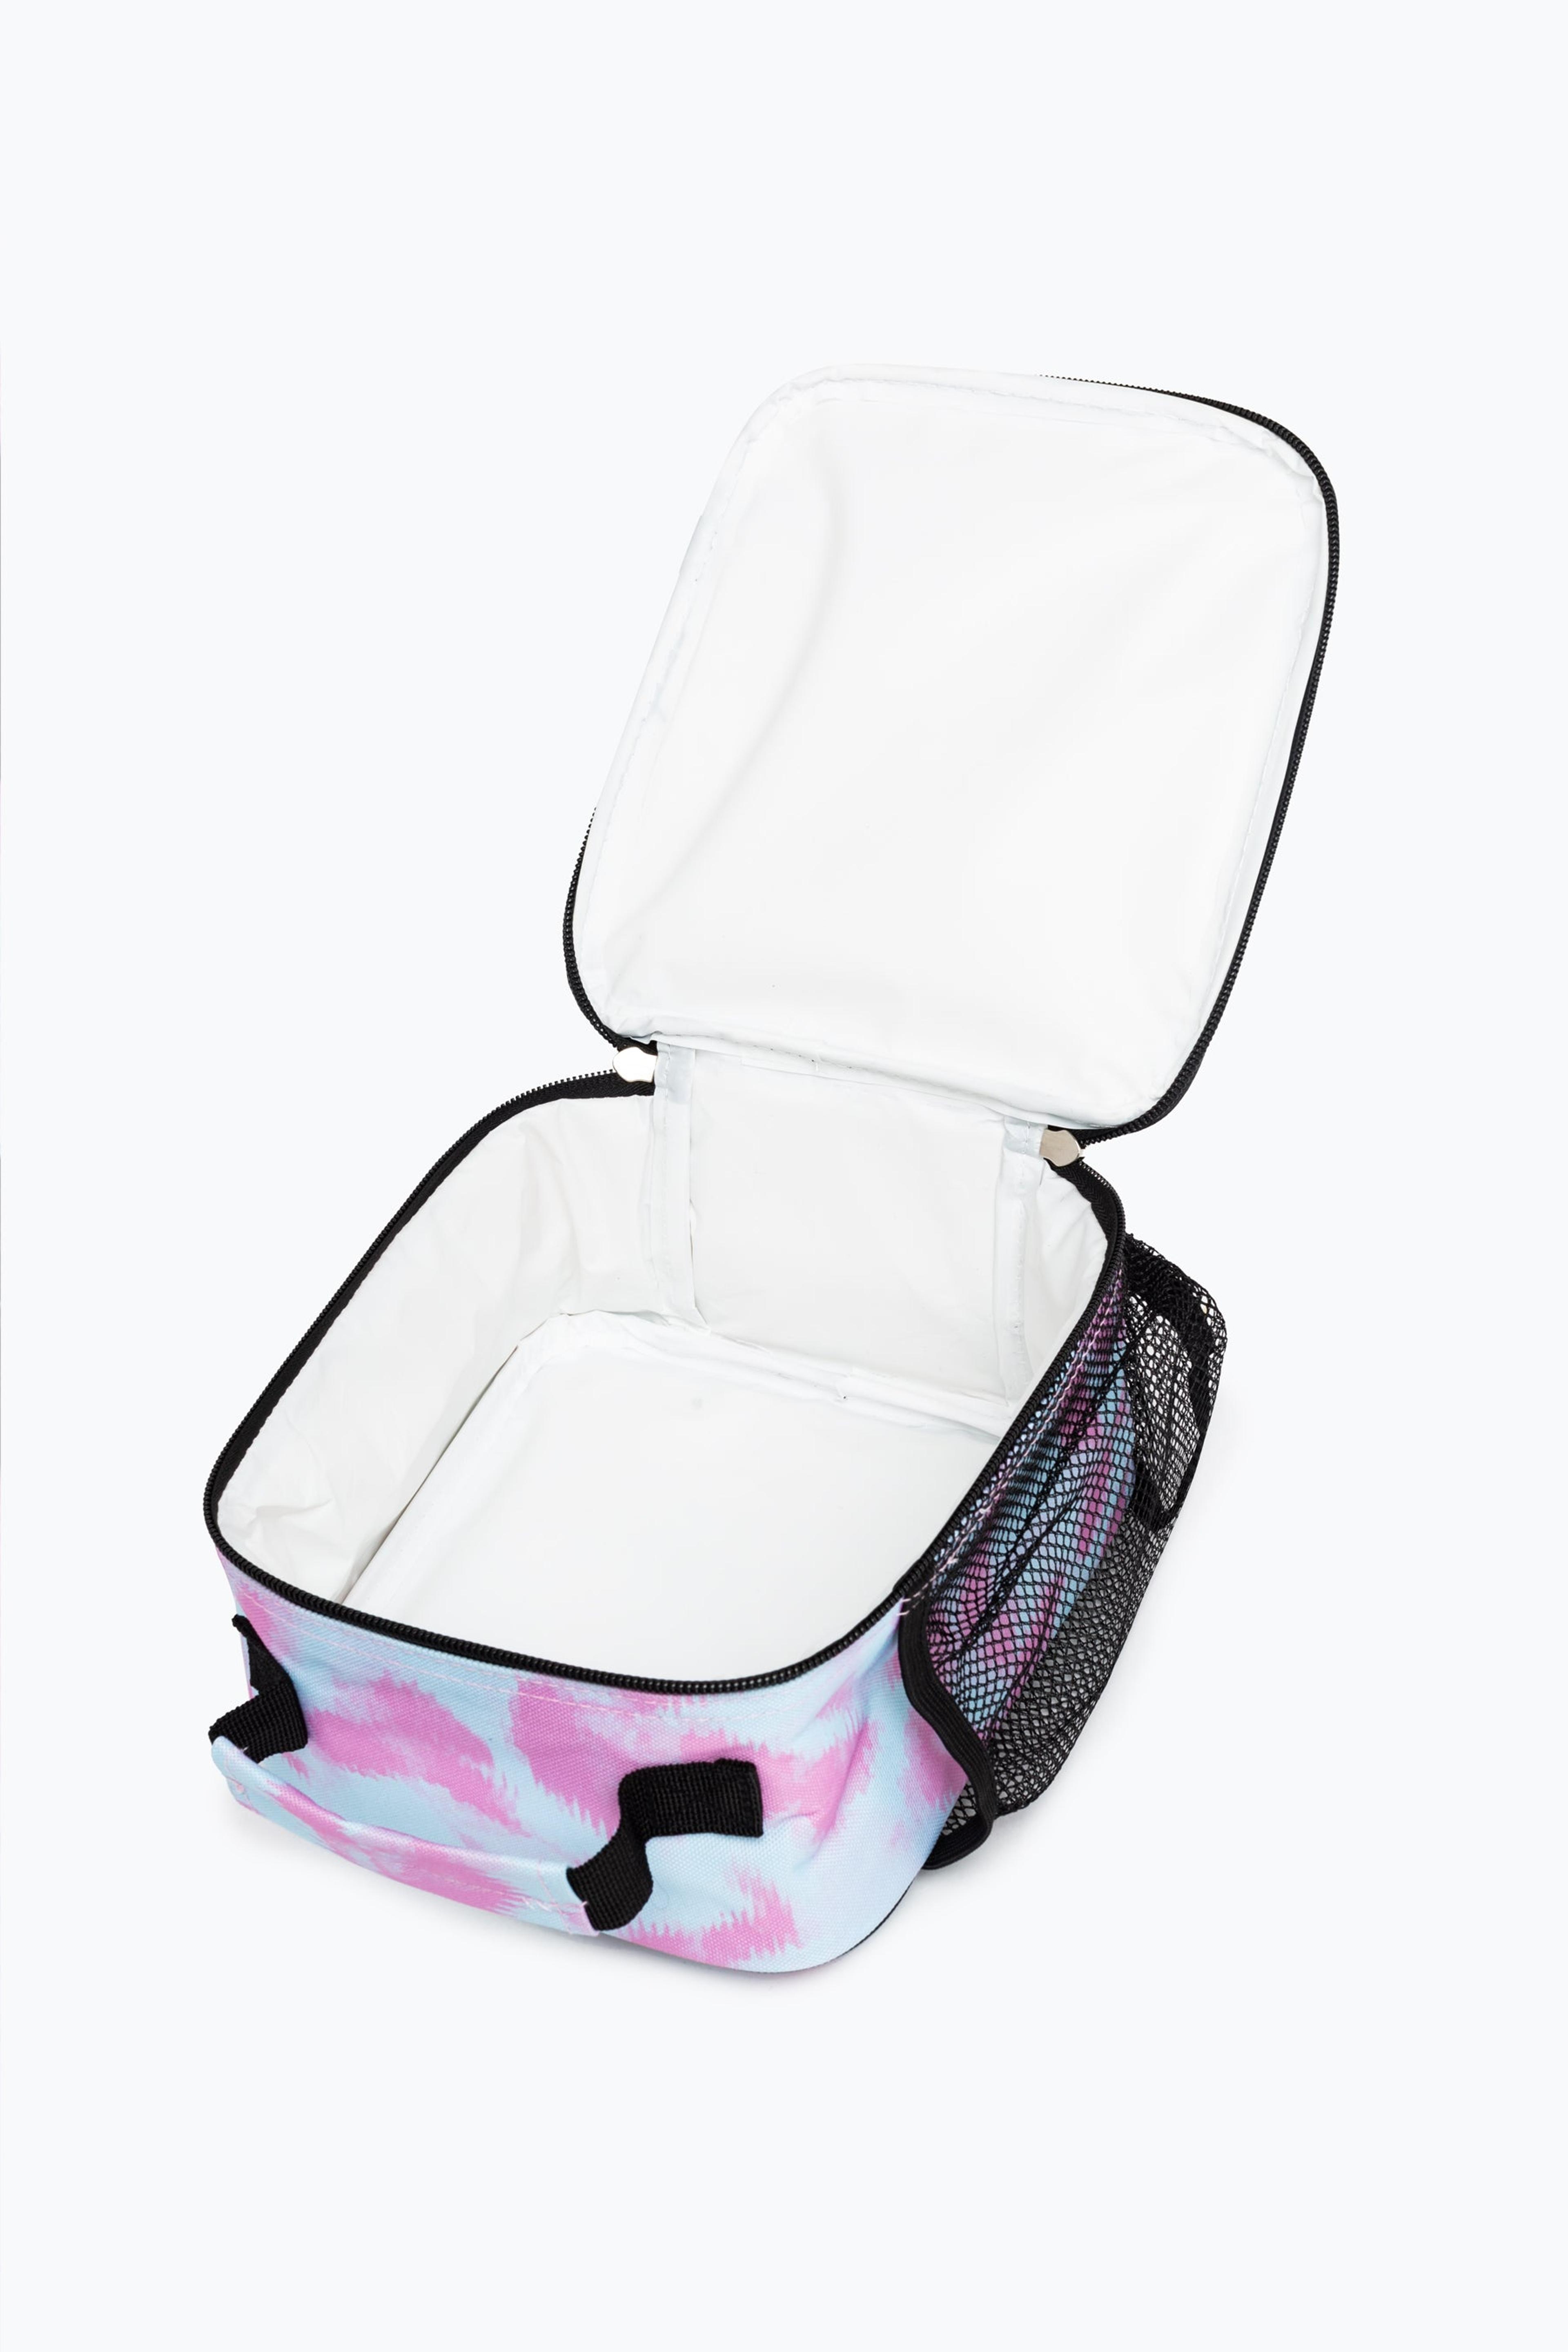 Alternate View 7 of HYPE UNISEX SPLODGE TIE DYE BLUE AND LILAC CREST LUNCHBOX